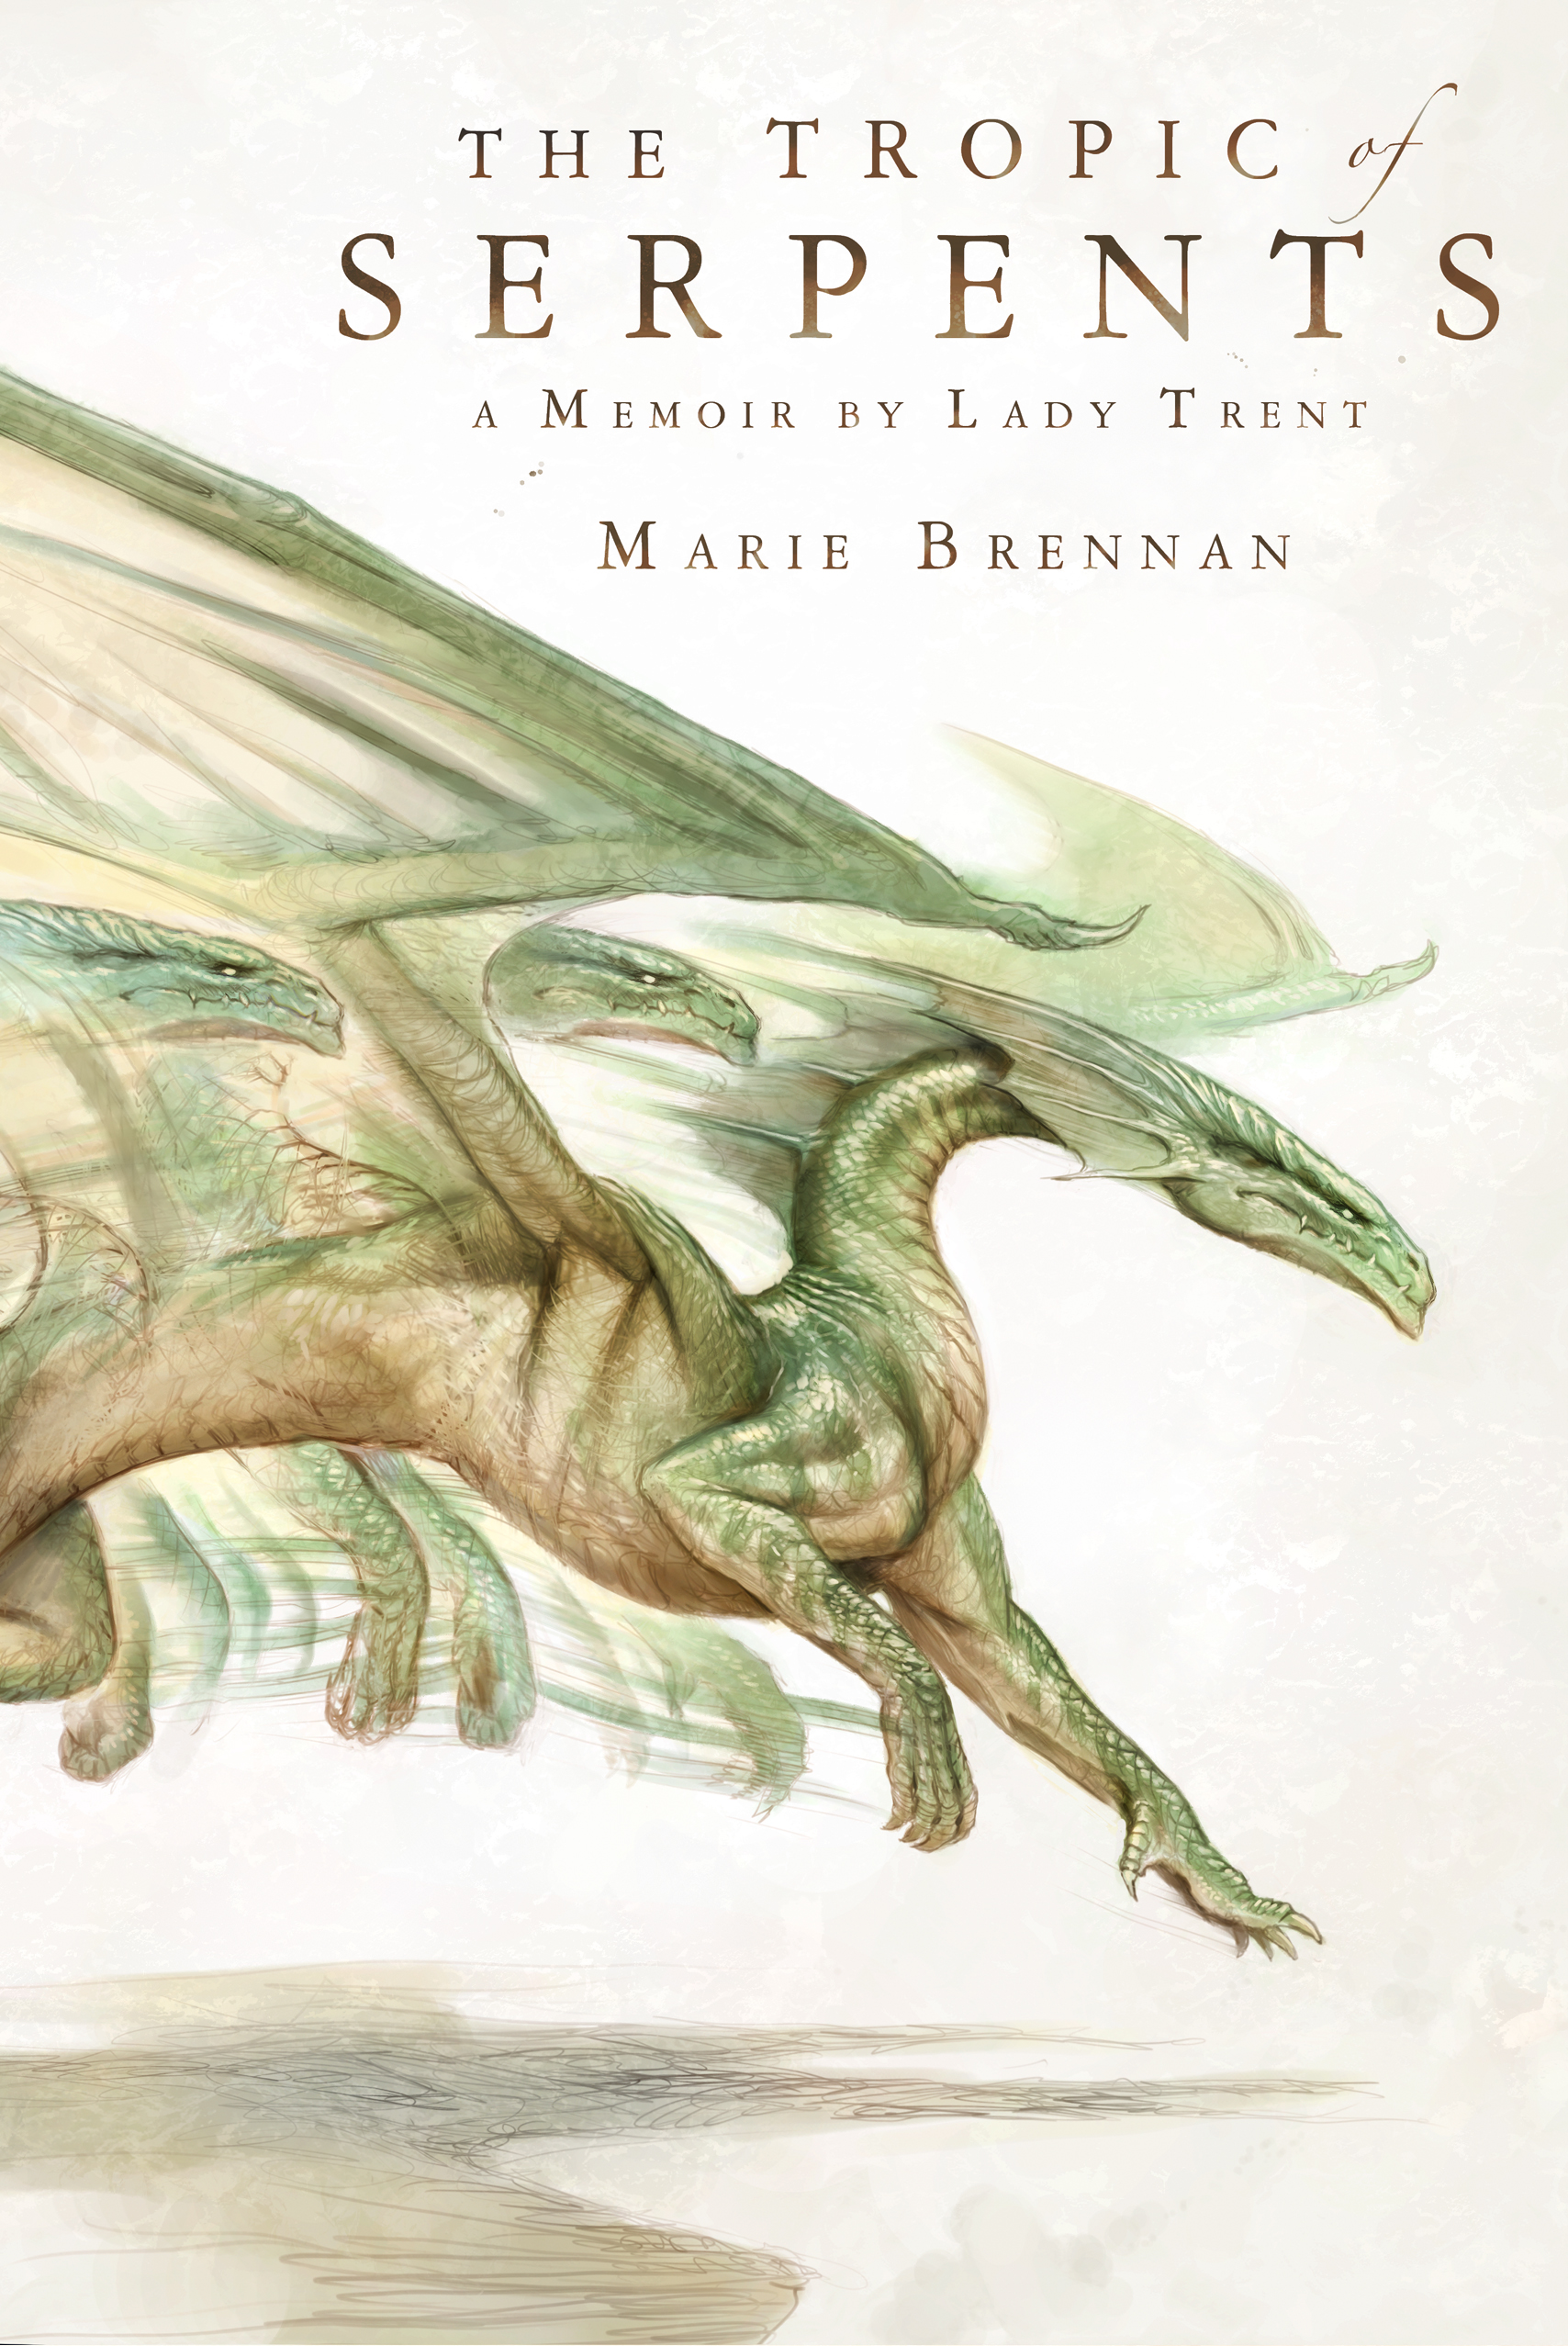 The Tropic of Serpents : A Memoir by Lady Trent by Marie Brennan